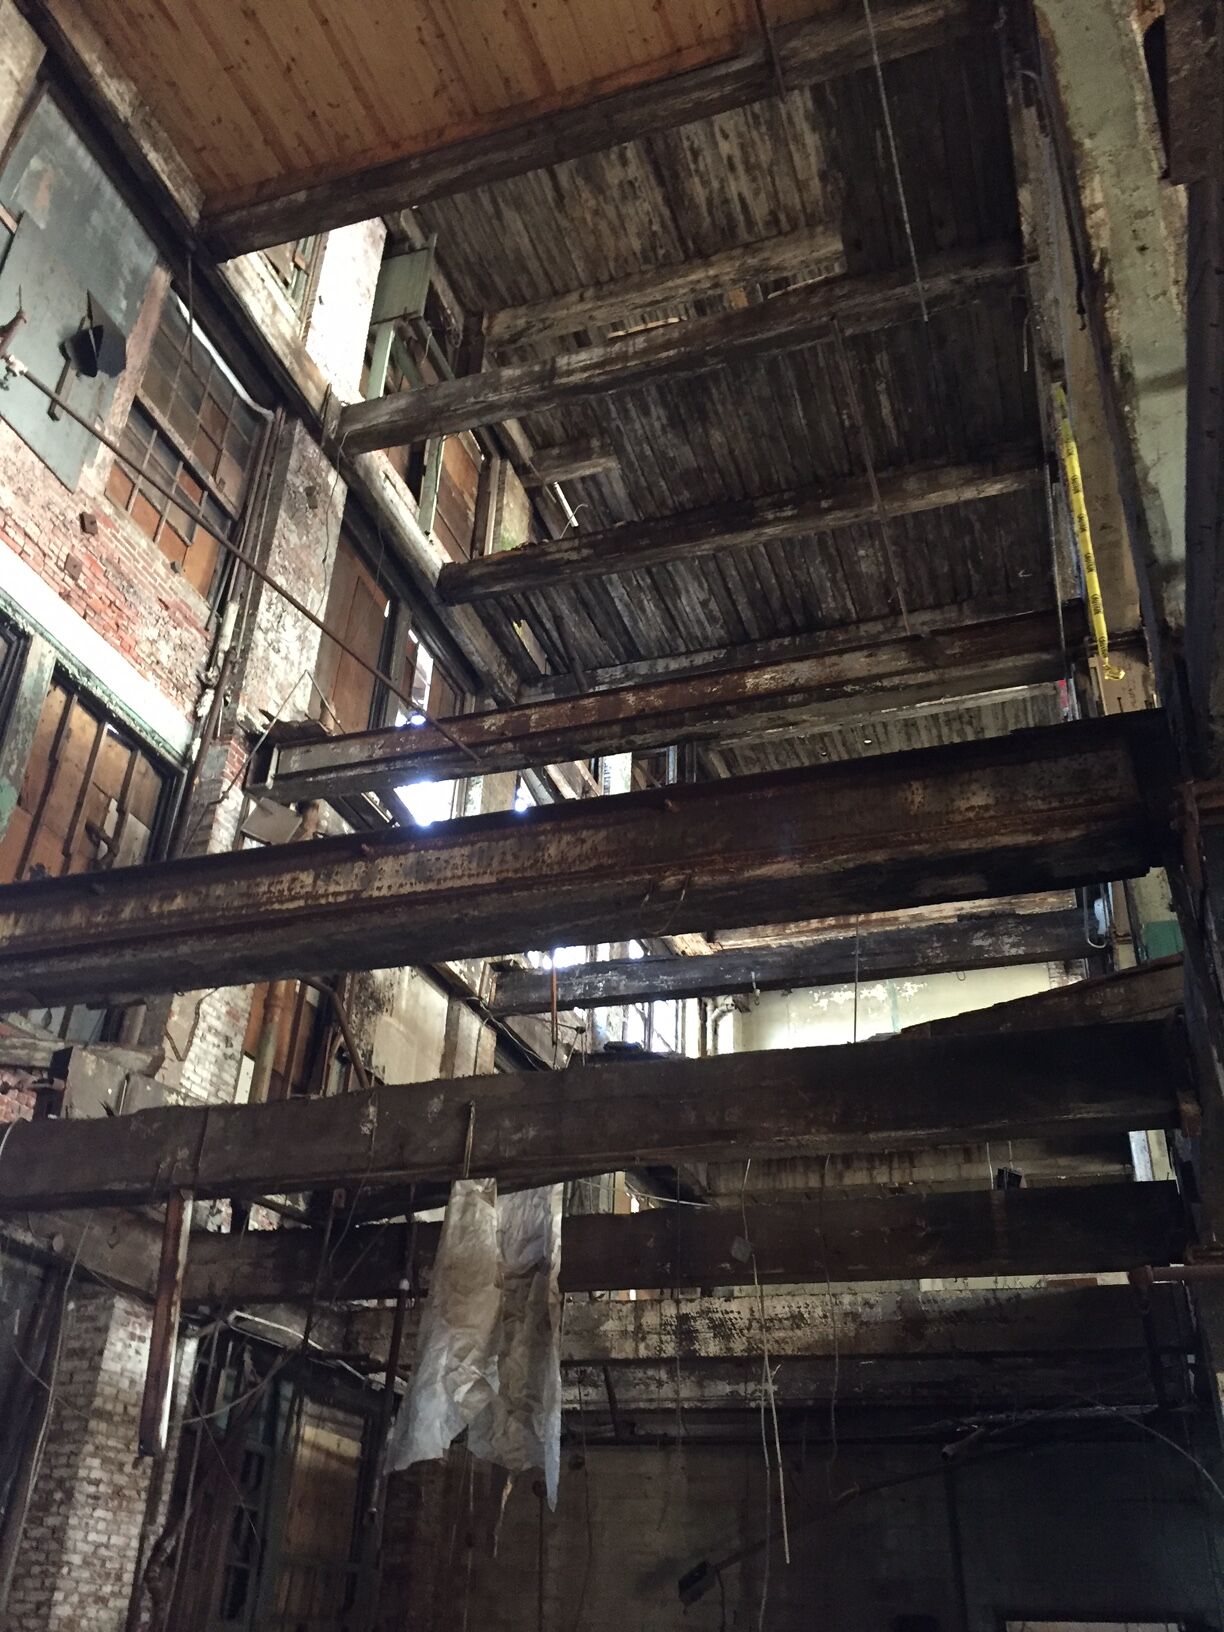   View looking up from the first floor through the five stories of the factory.&nbsp;  